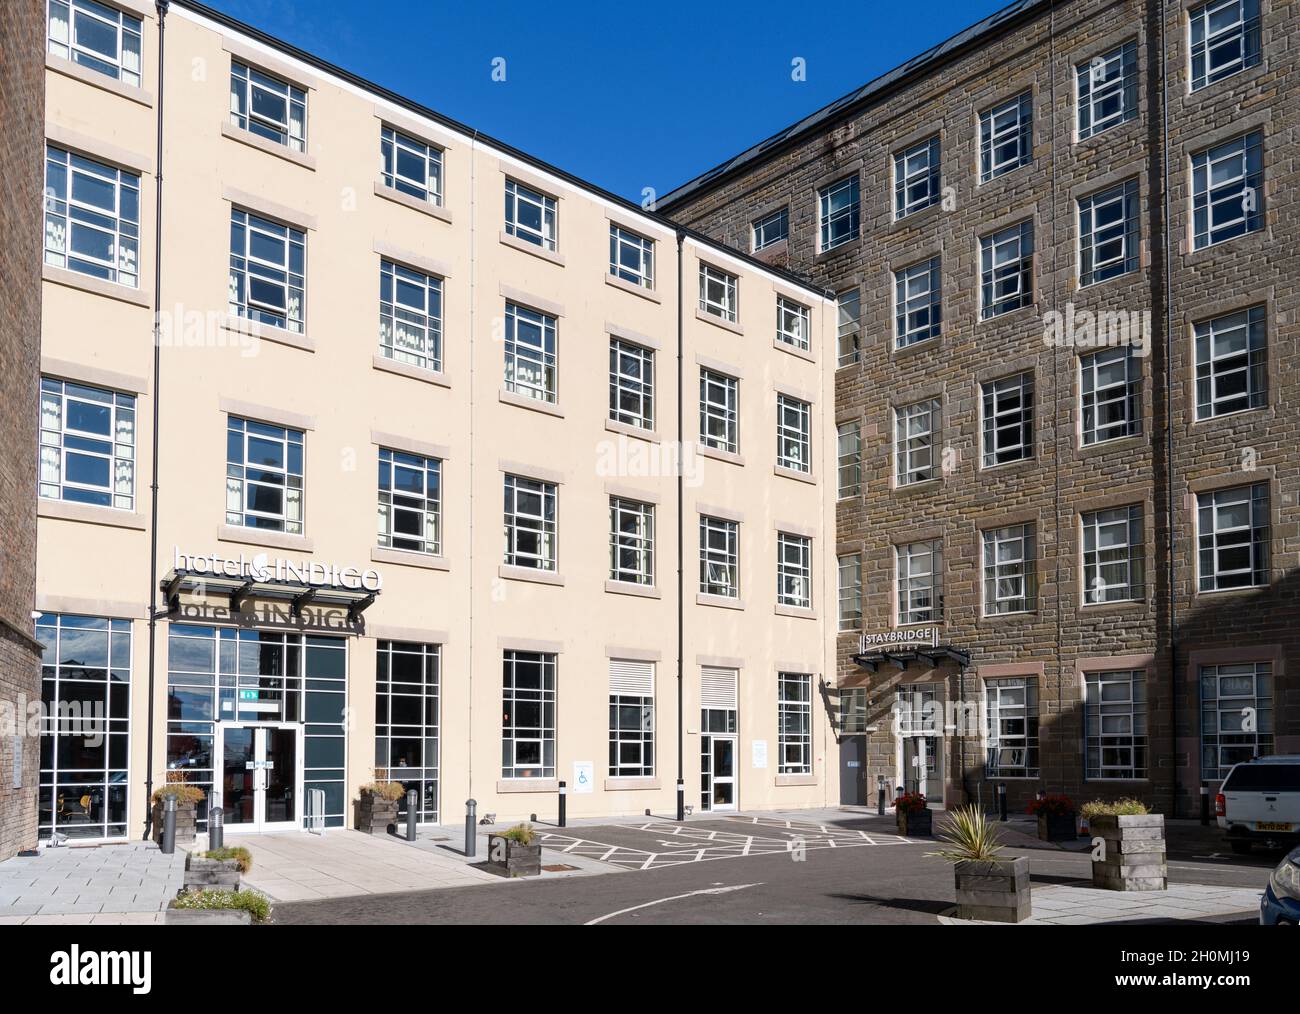 The Hotel Indigo and Staybridge Suites in an old jute mill, Dundee, Scotland, UK Stock Photo